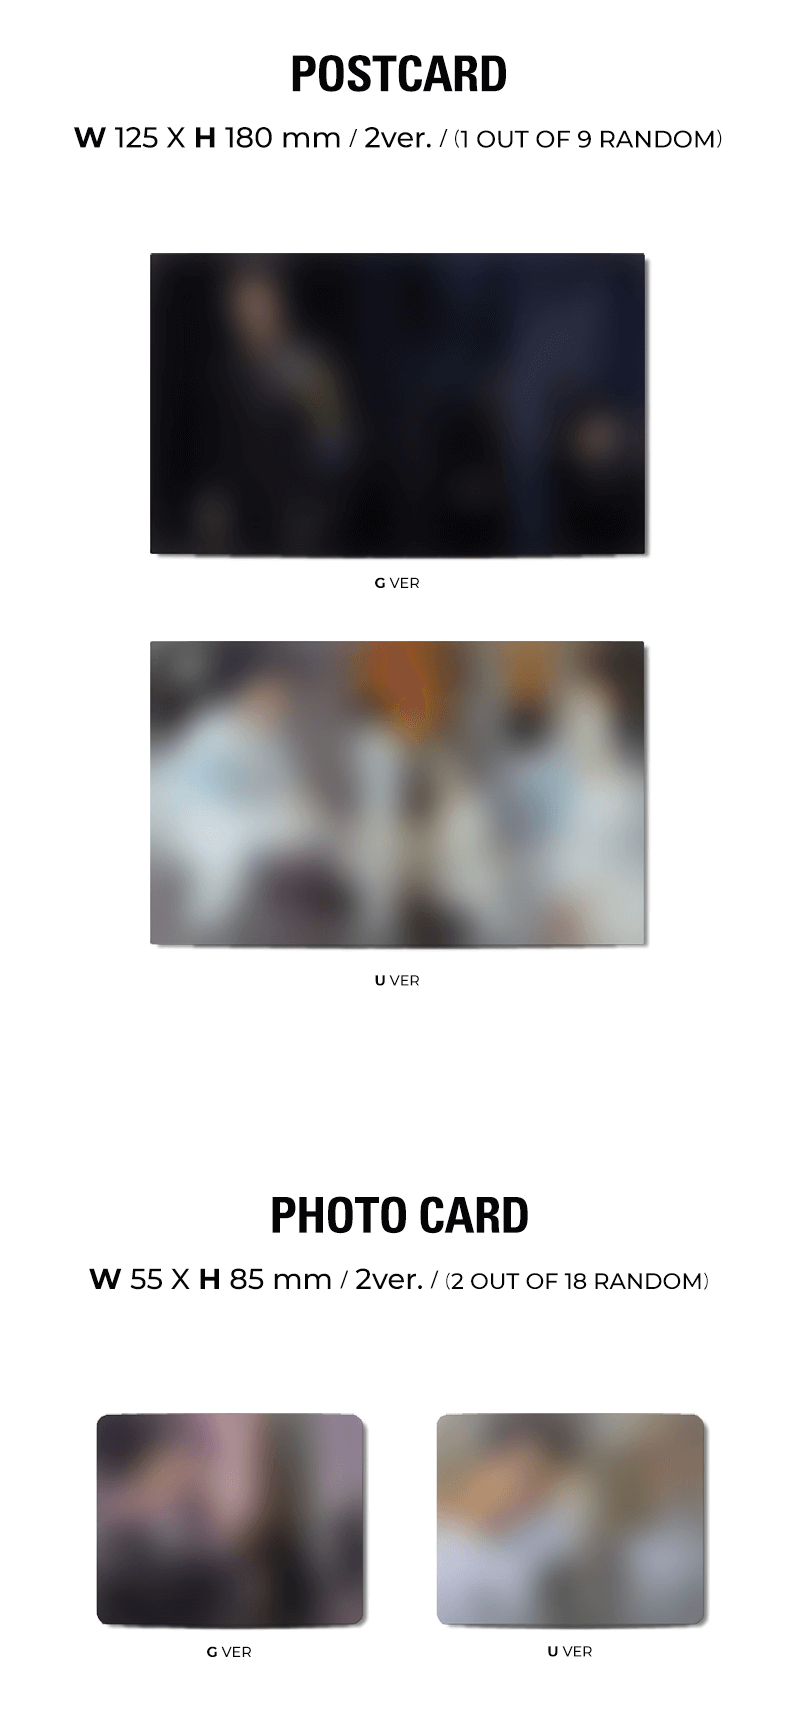 BLANK2Y K2Y I : CONFIDENCE 'Thumbs Up' Inclusions Postcard Photocards